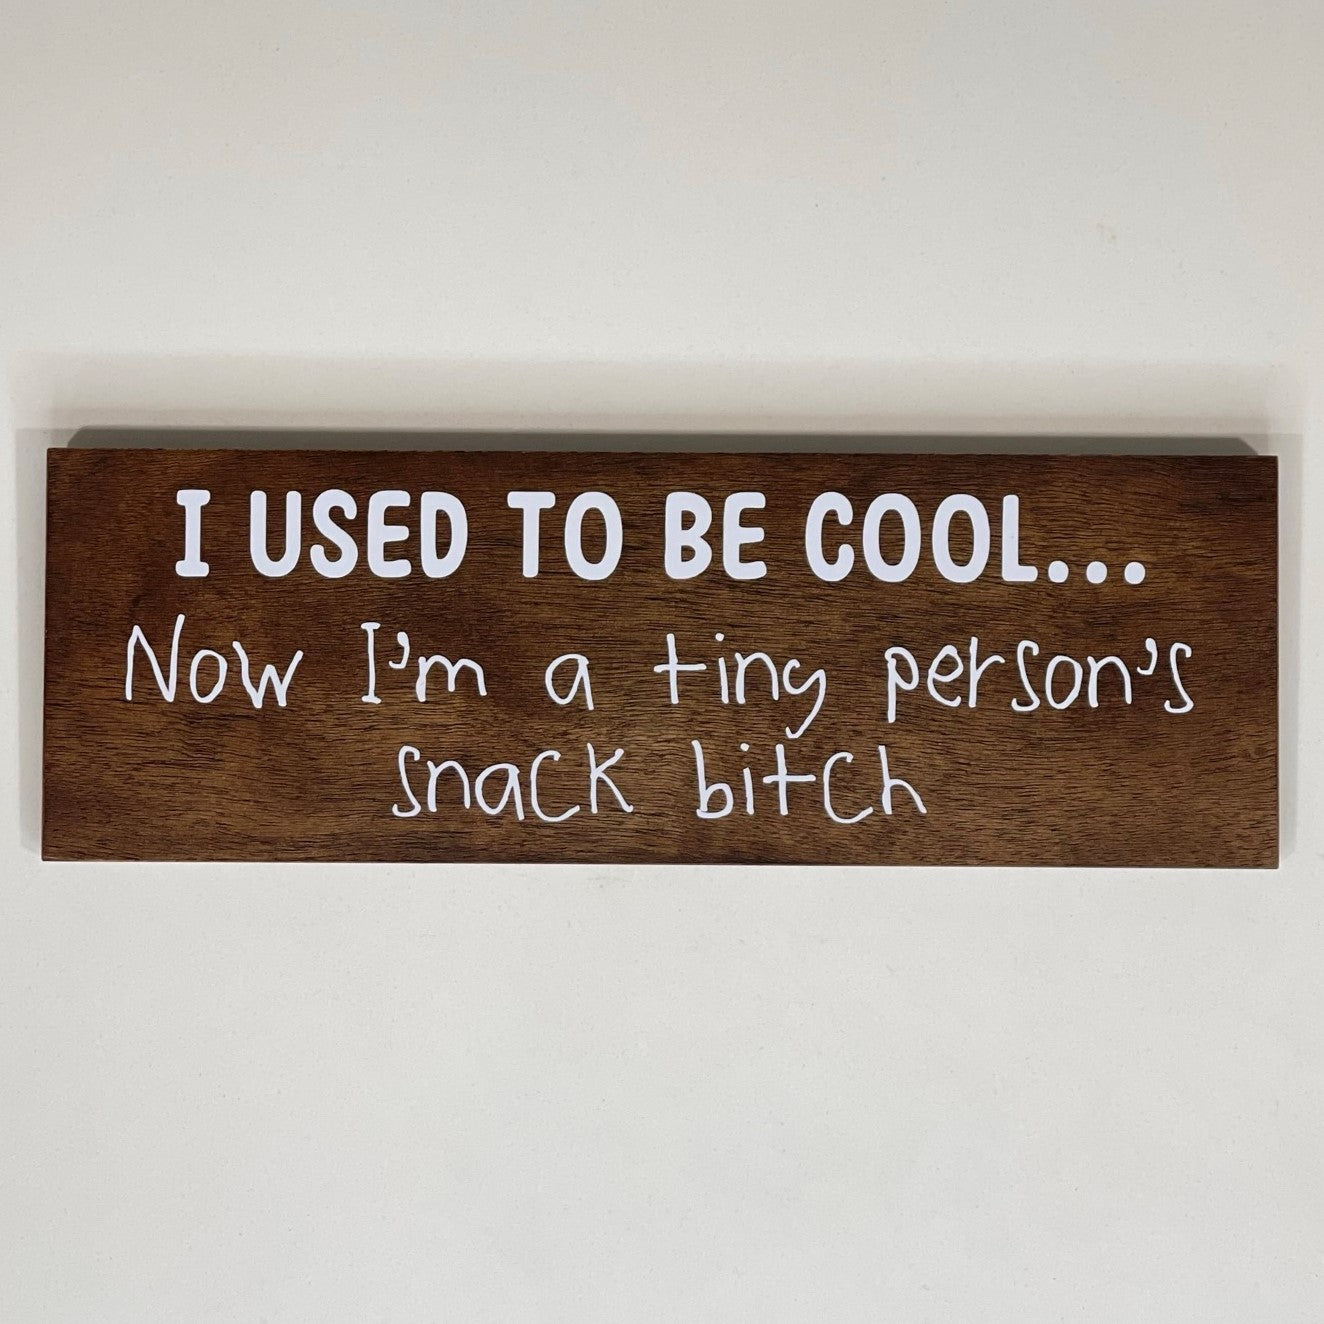 I Used To Be Cool - Funny Sign - Wall Decor - Bar Wall Art - Wooden Sign